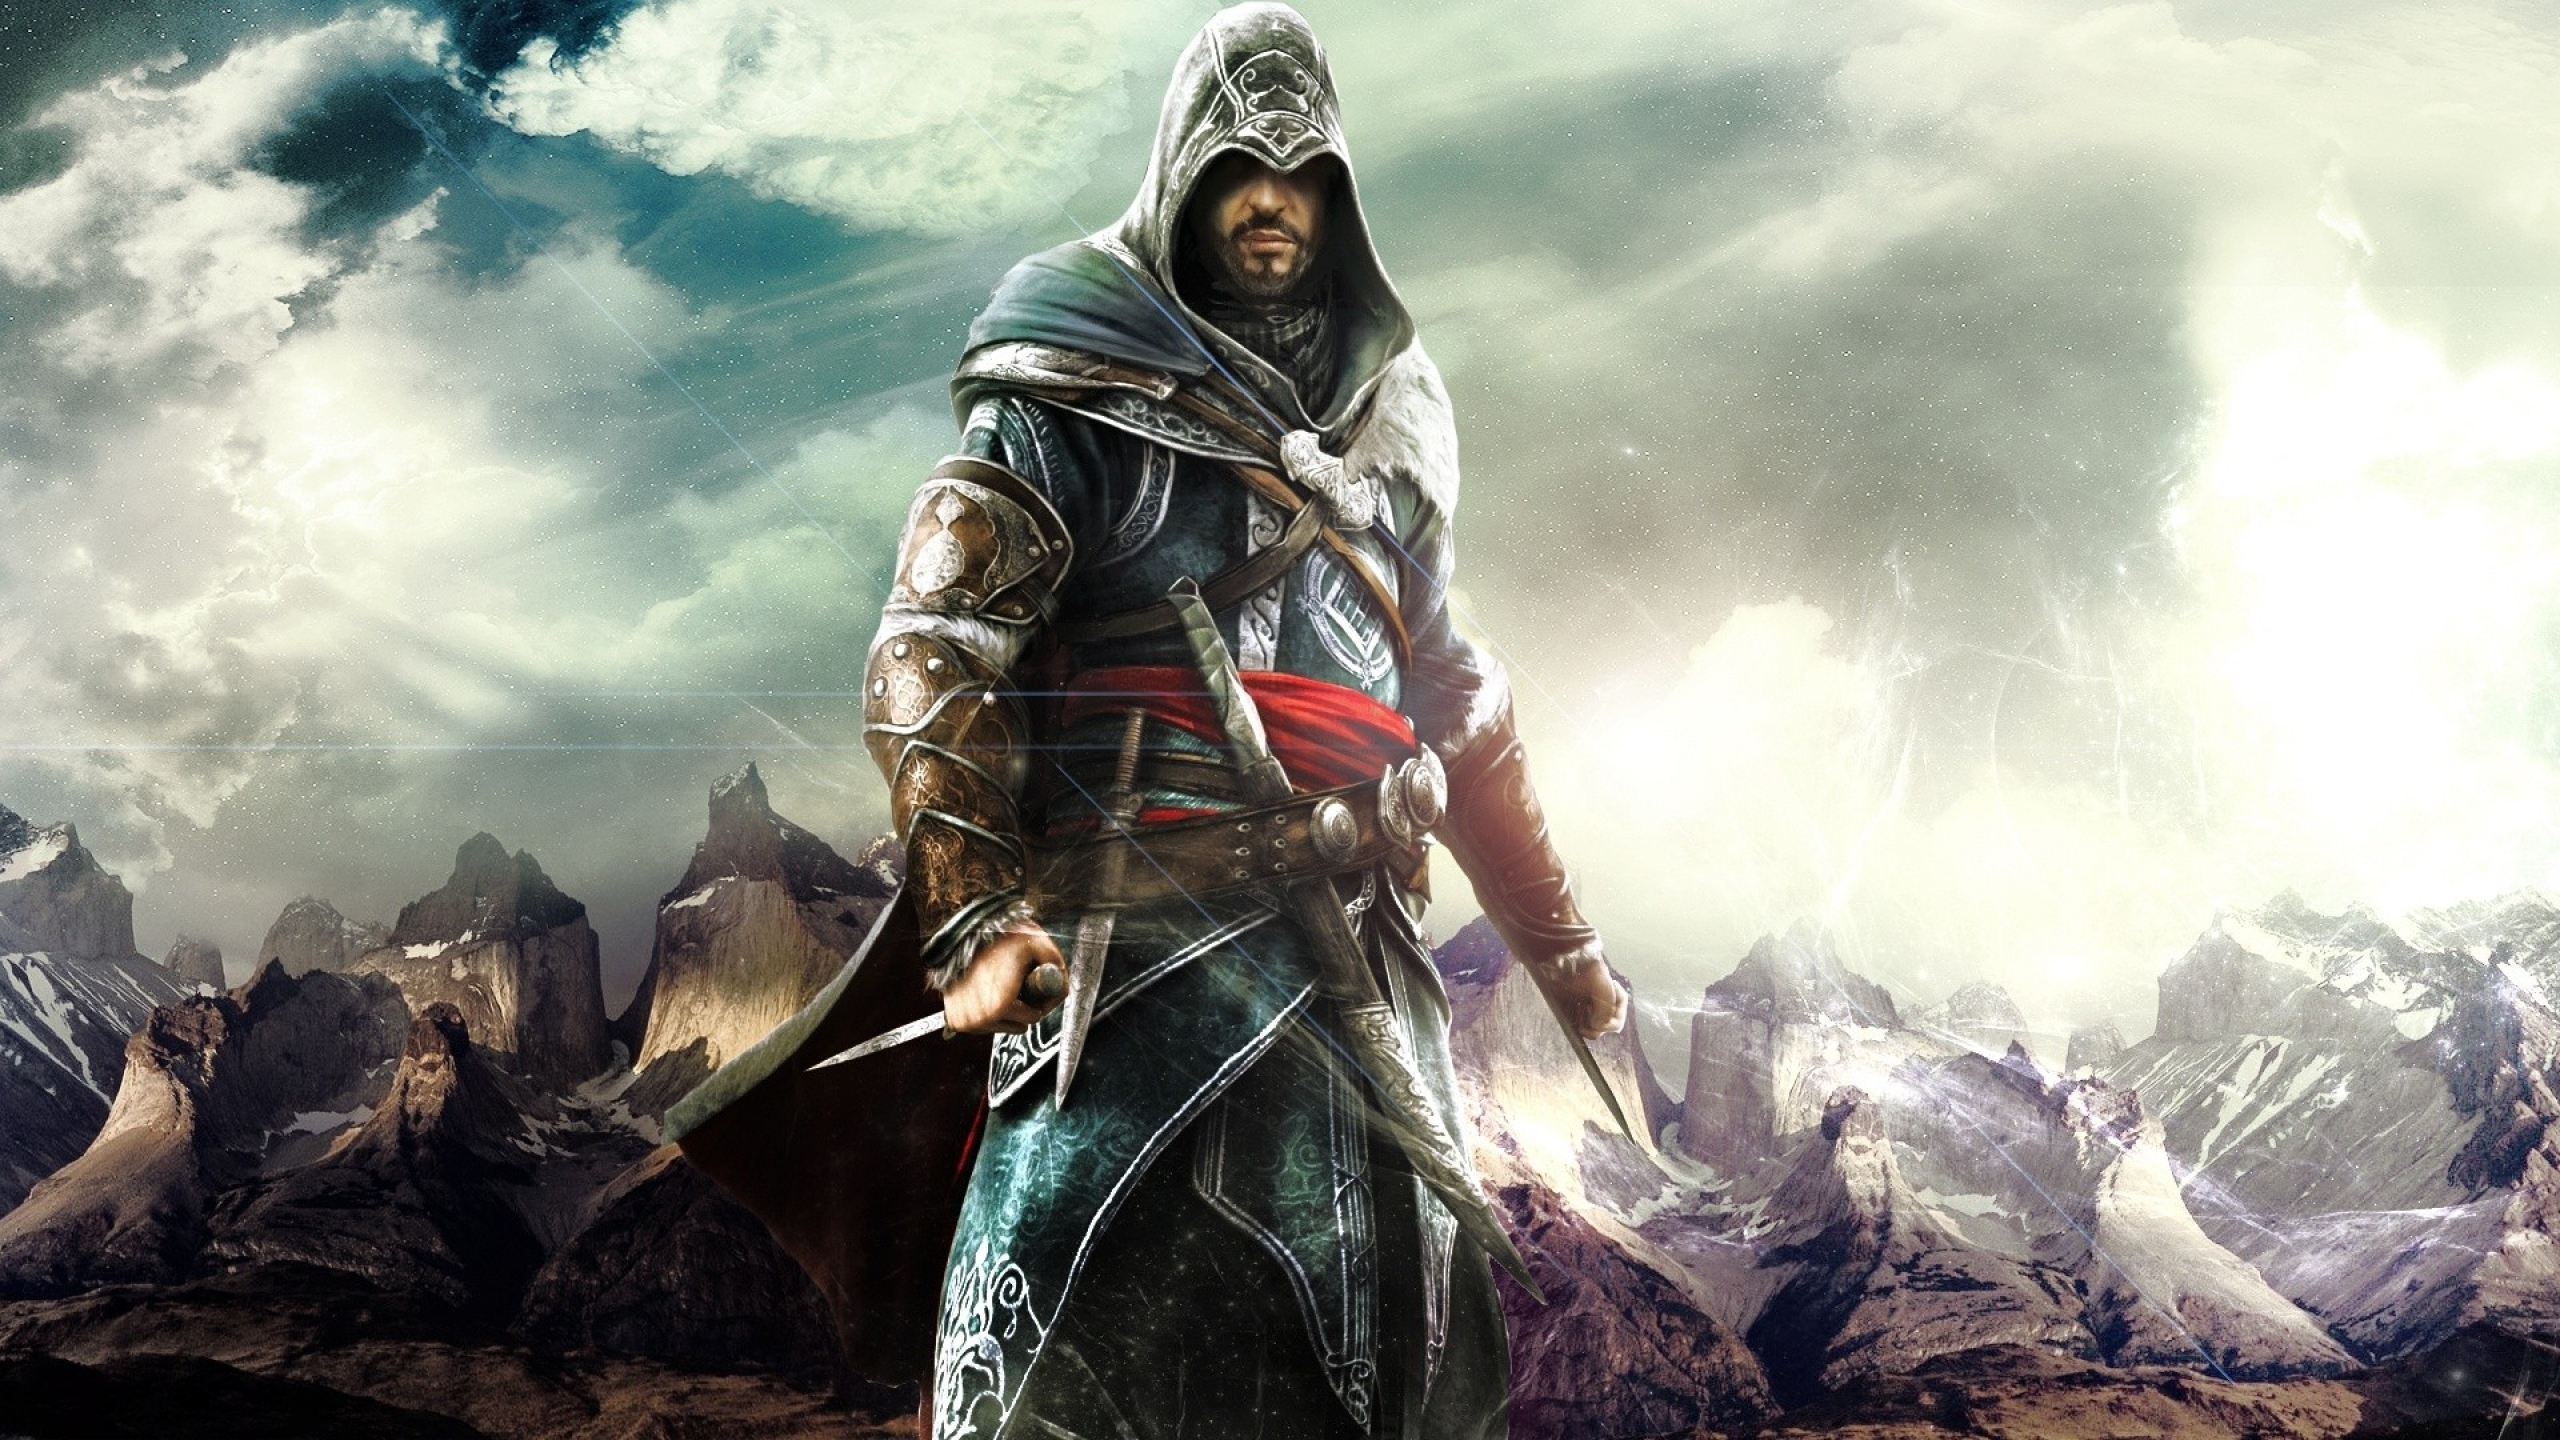 Assassin's Creed: Revelations Phone Wallpaper - Mobile Abyss